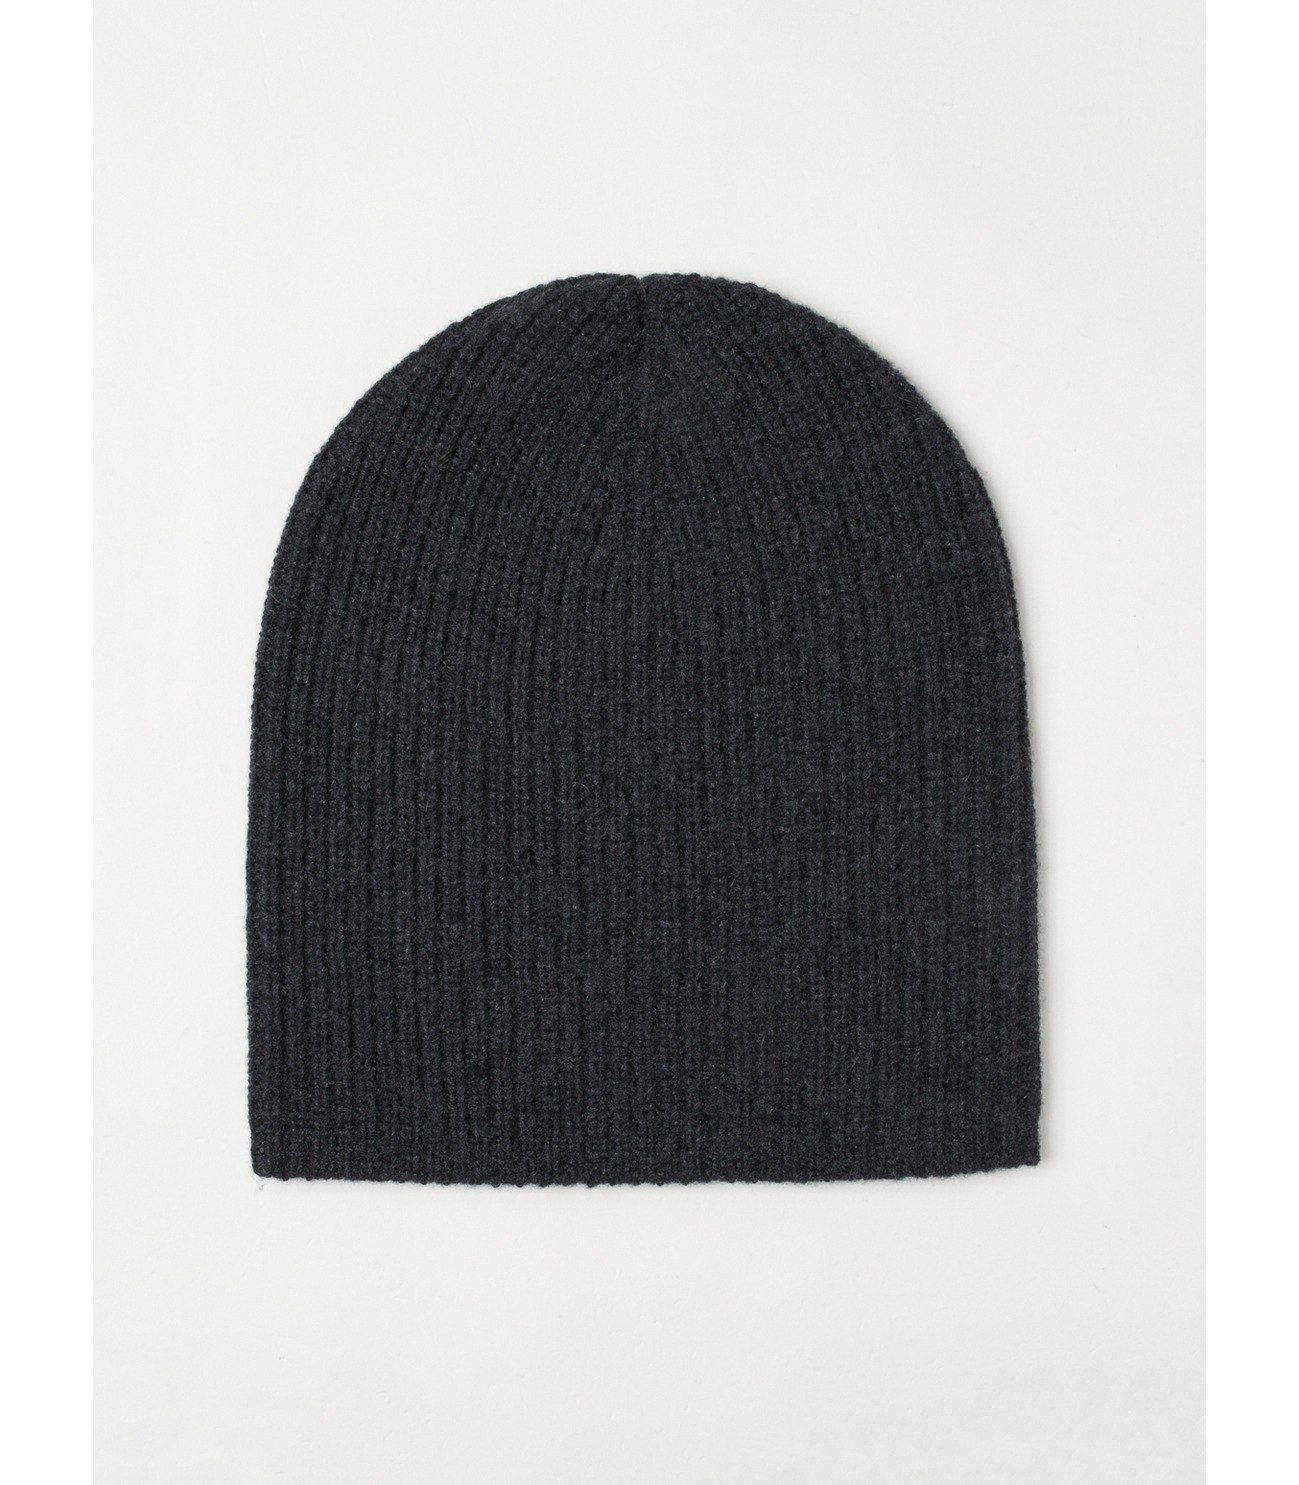 Holiday cashmere cap 詳細画像 charcoal 1